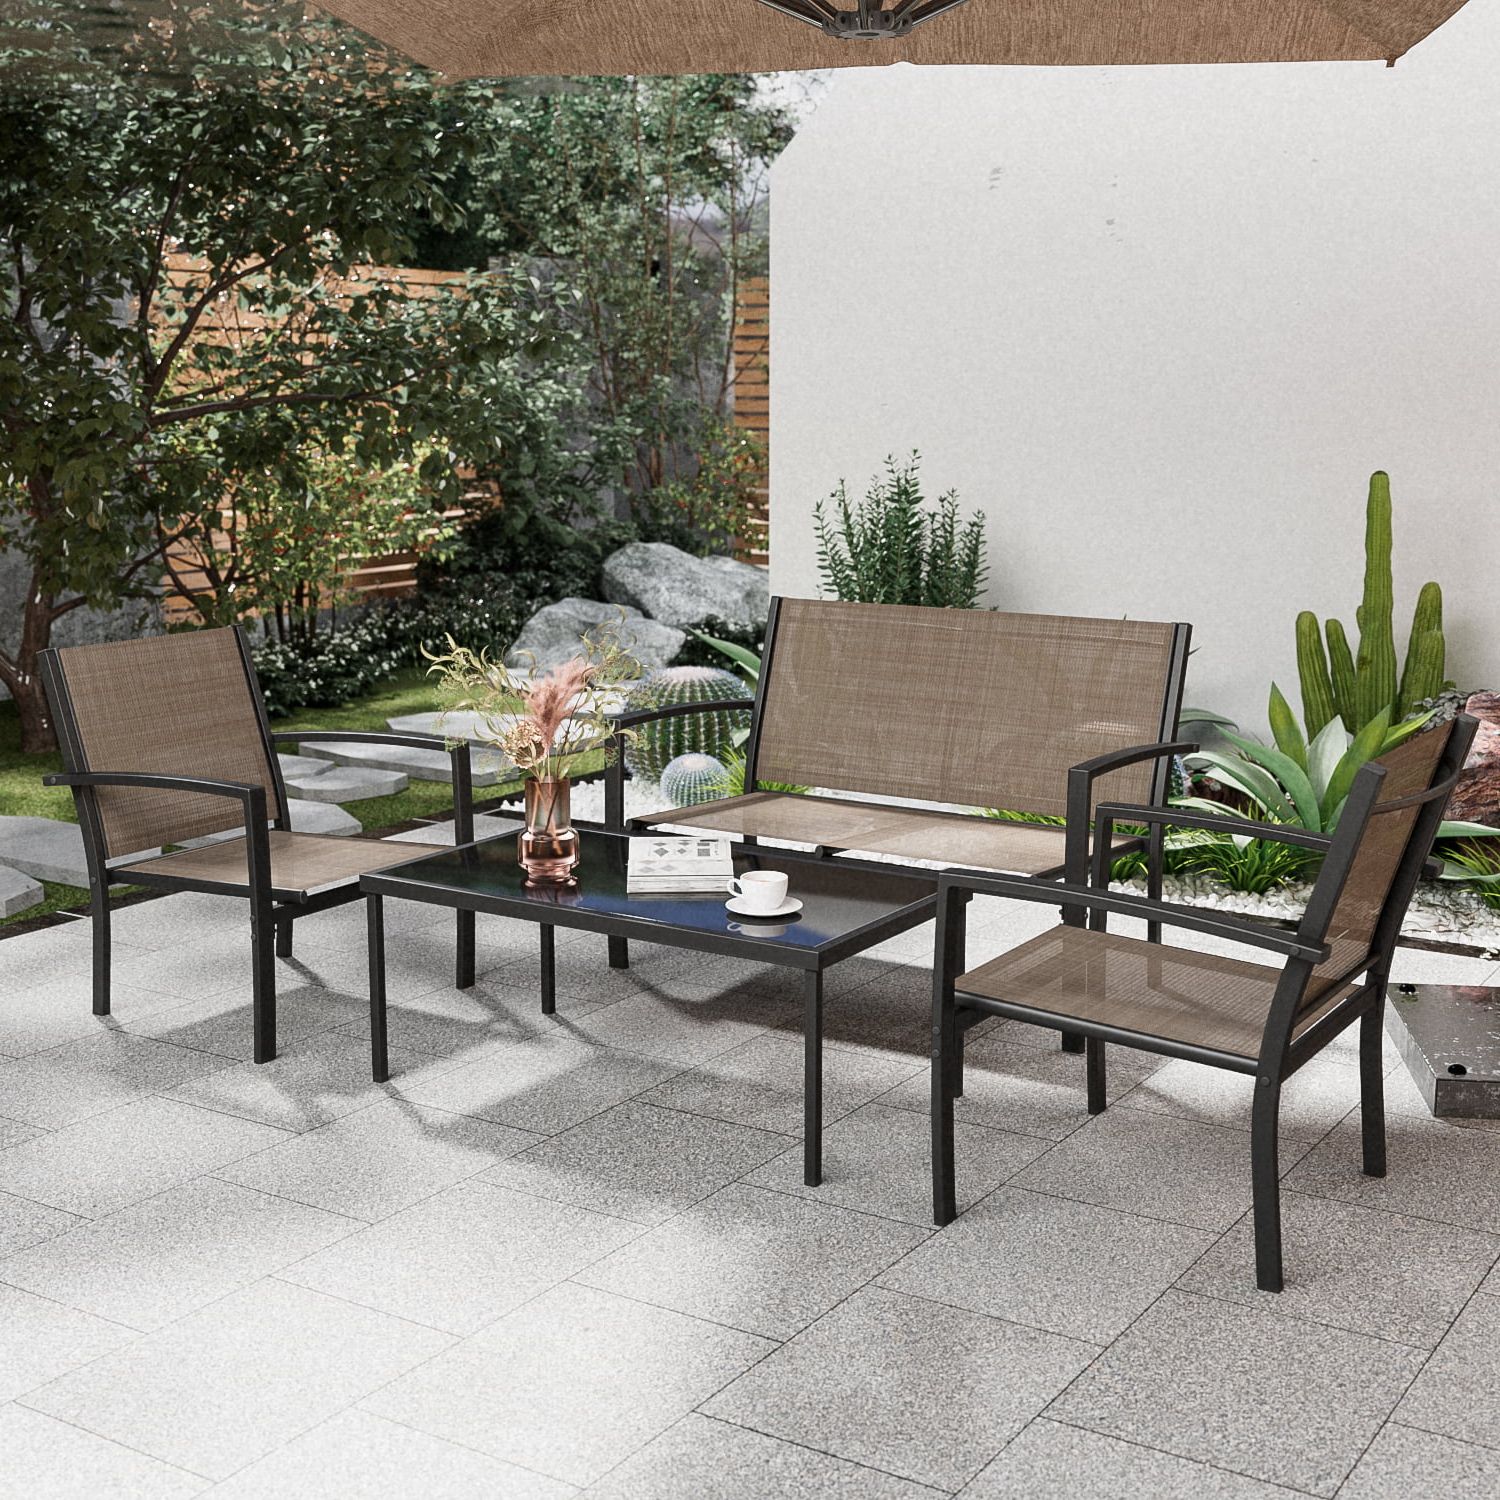 Current Loveseat Tea Table For Balcony Pertaining To Lacoo 4 Pieces Outdoor Furniture Set Patio Textilene Steel Conversation Set  With Loveseat Tea Table For Lawn And Balcony, Brown – Walmart (Photo 2 of 15)